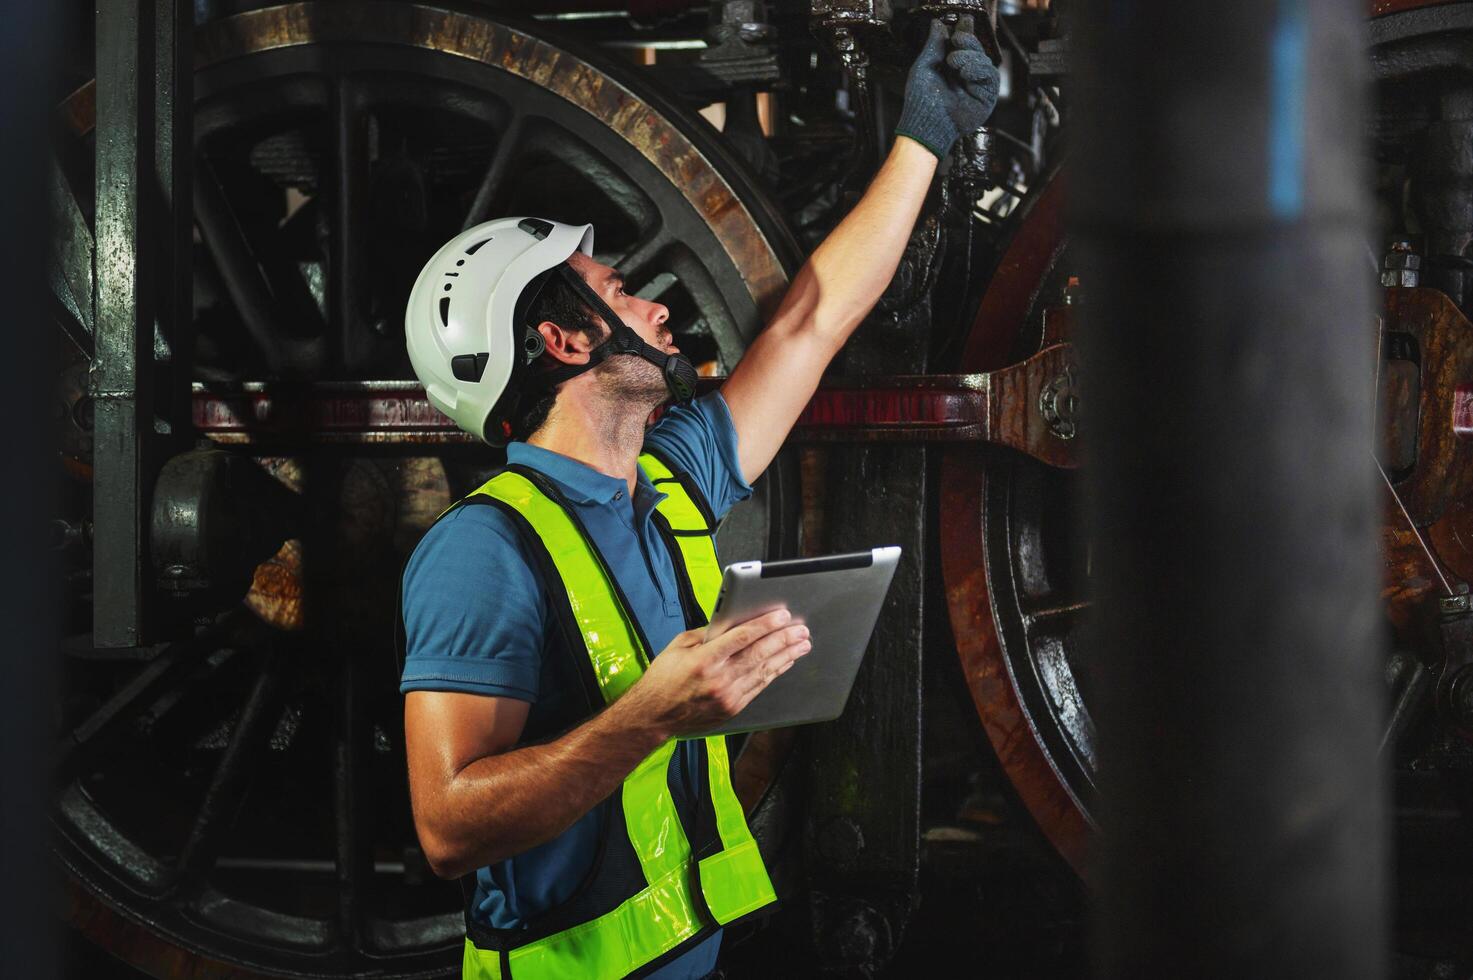 maintenance engineer working operating machines in industry factory photo